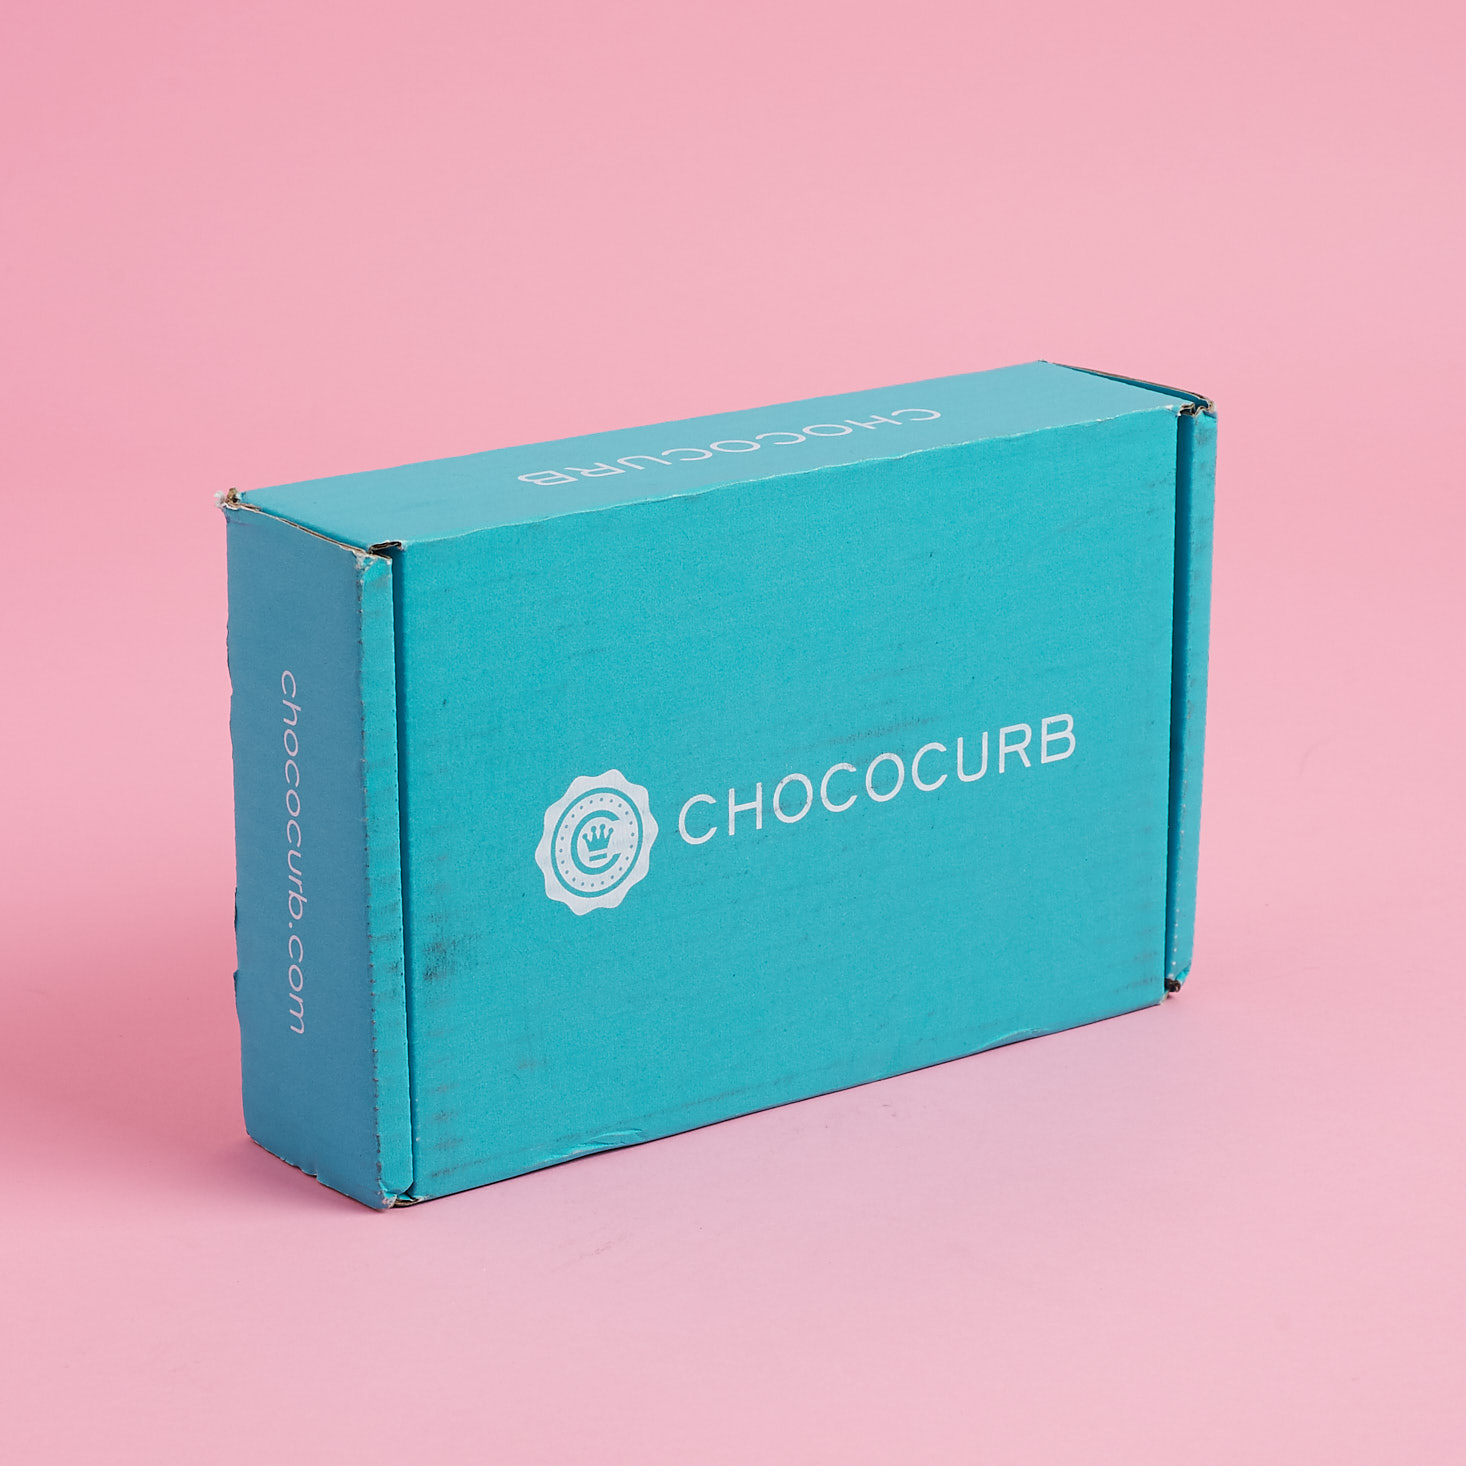 Chococurb Classic Box Review + Coupon – December 2017